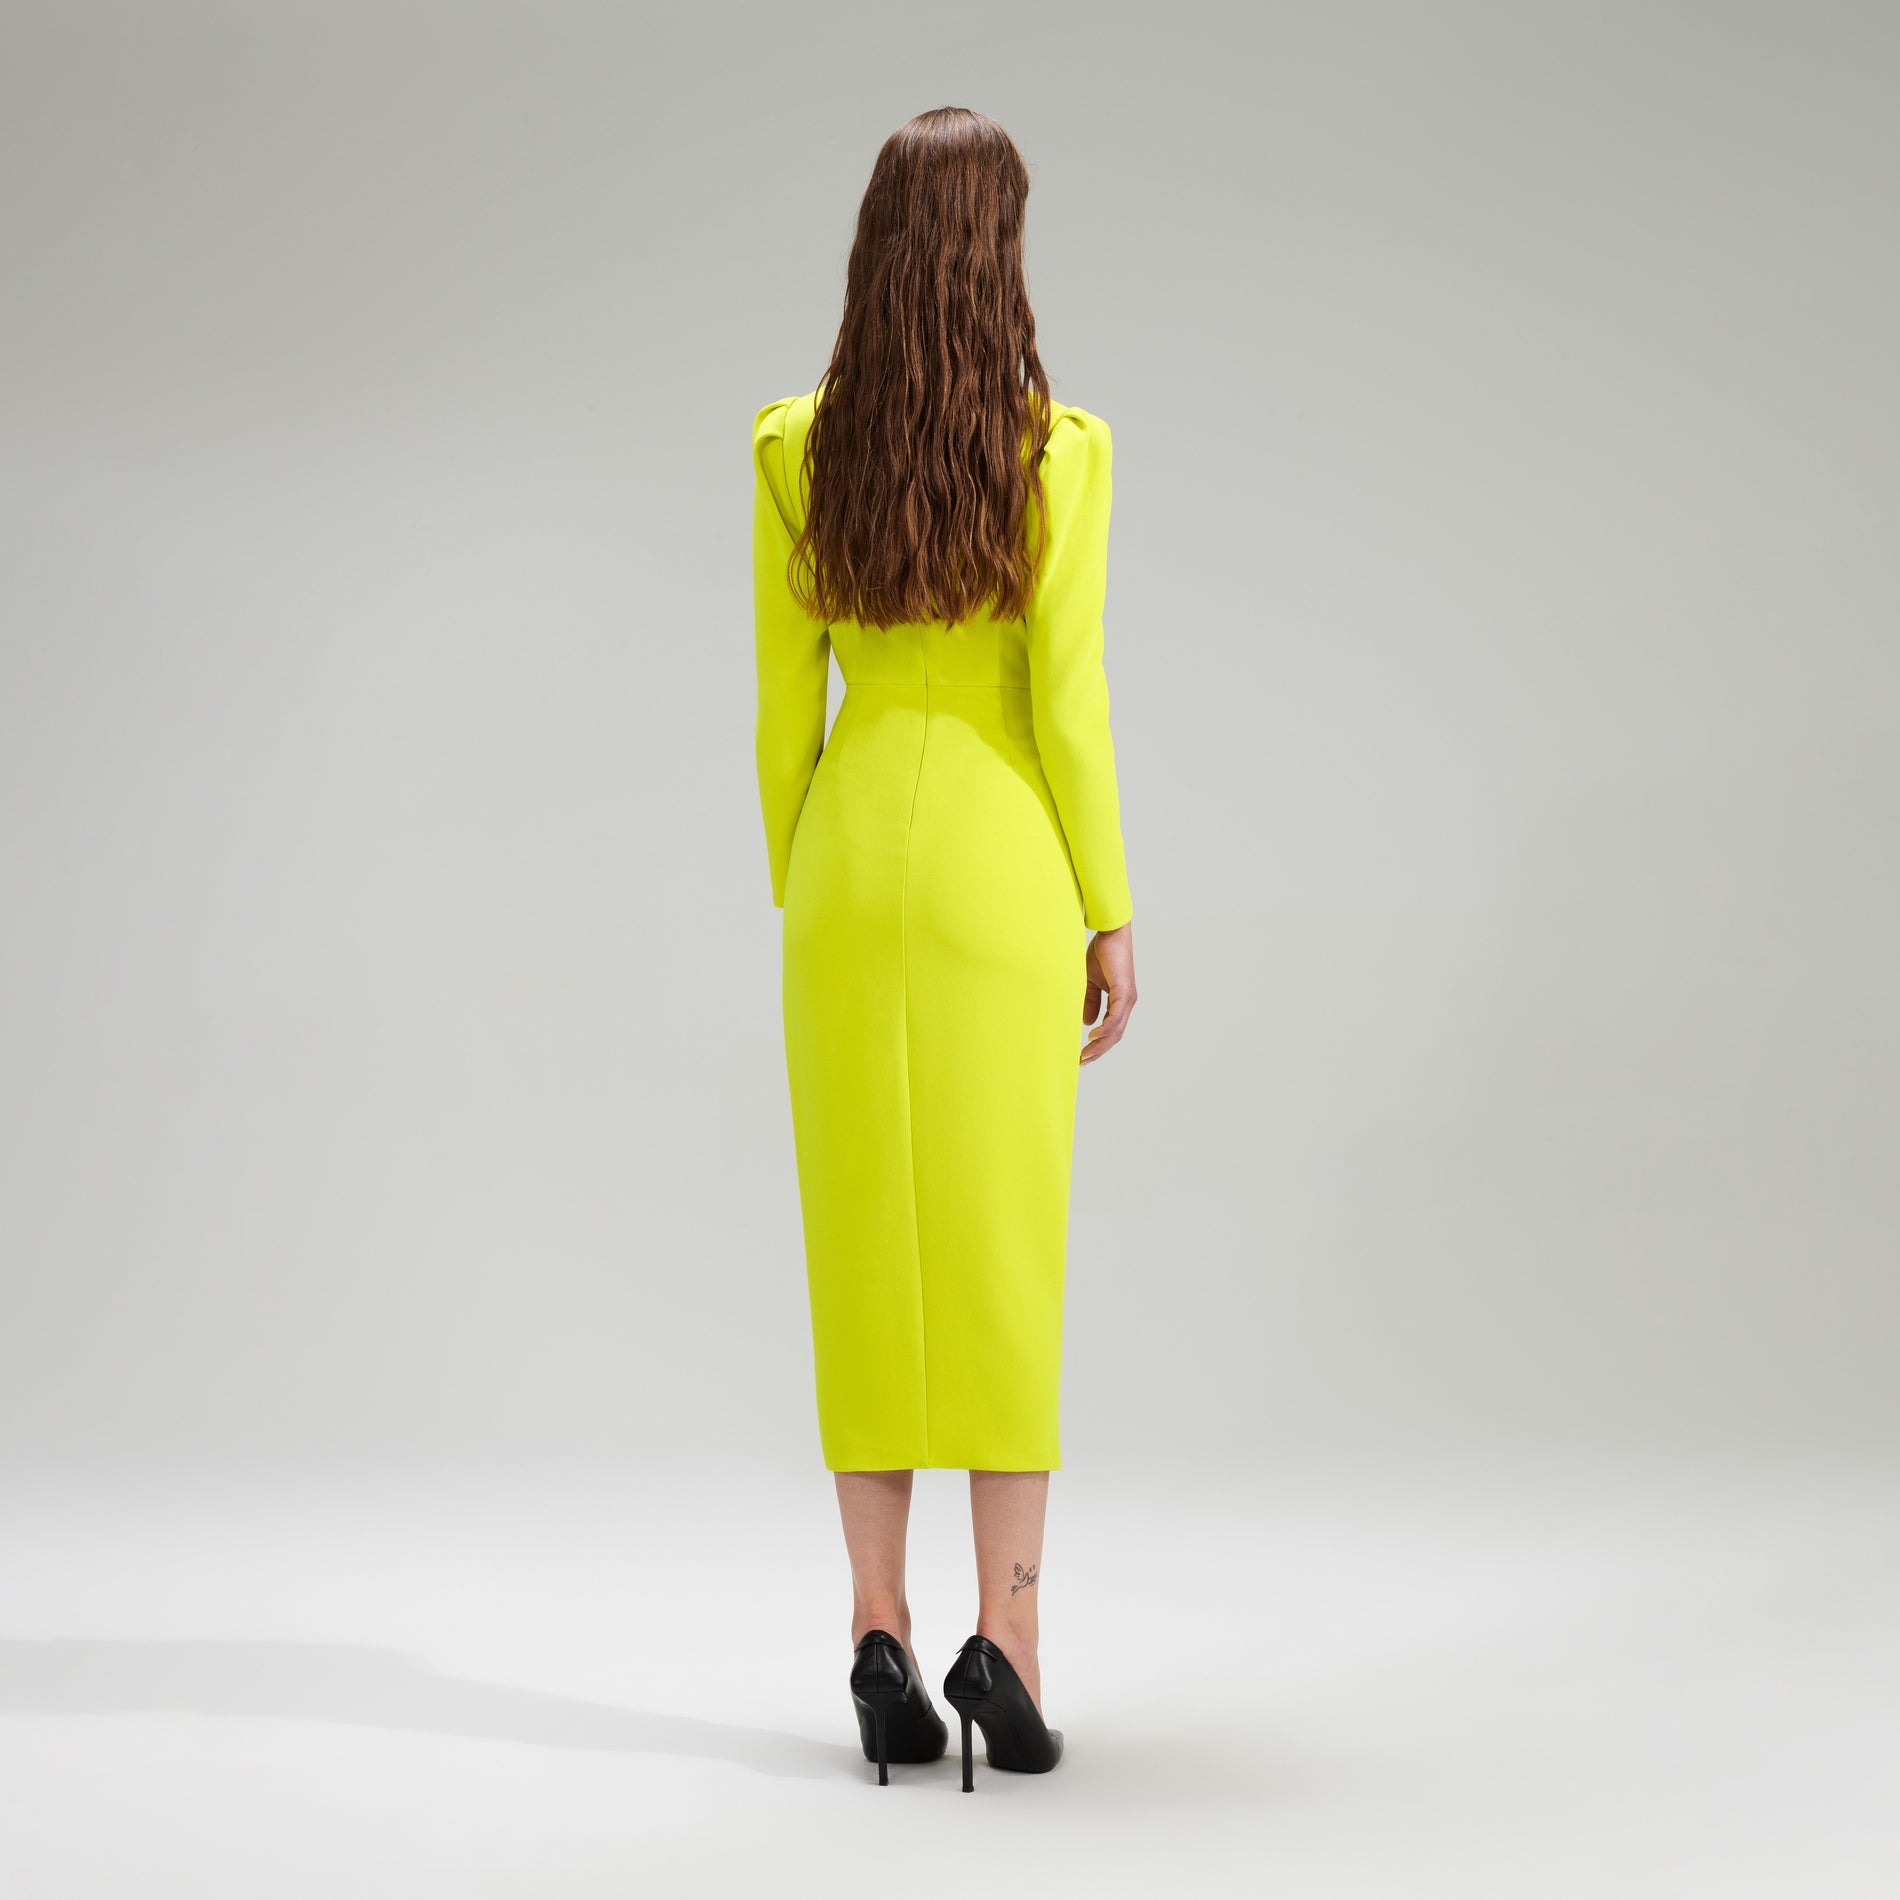 A woman wearing the Lime Crepe Ruched Midi Dress